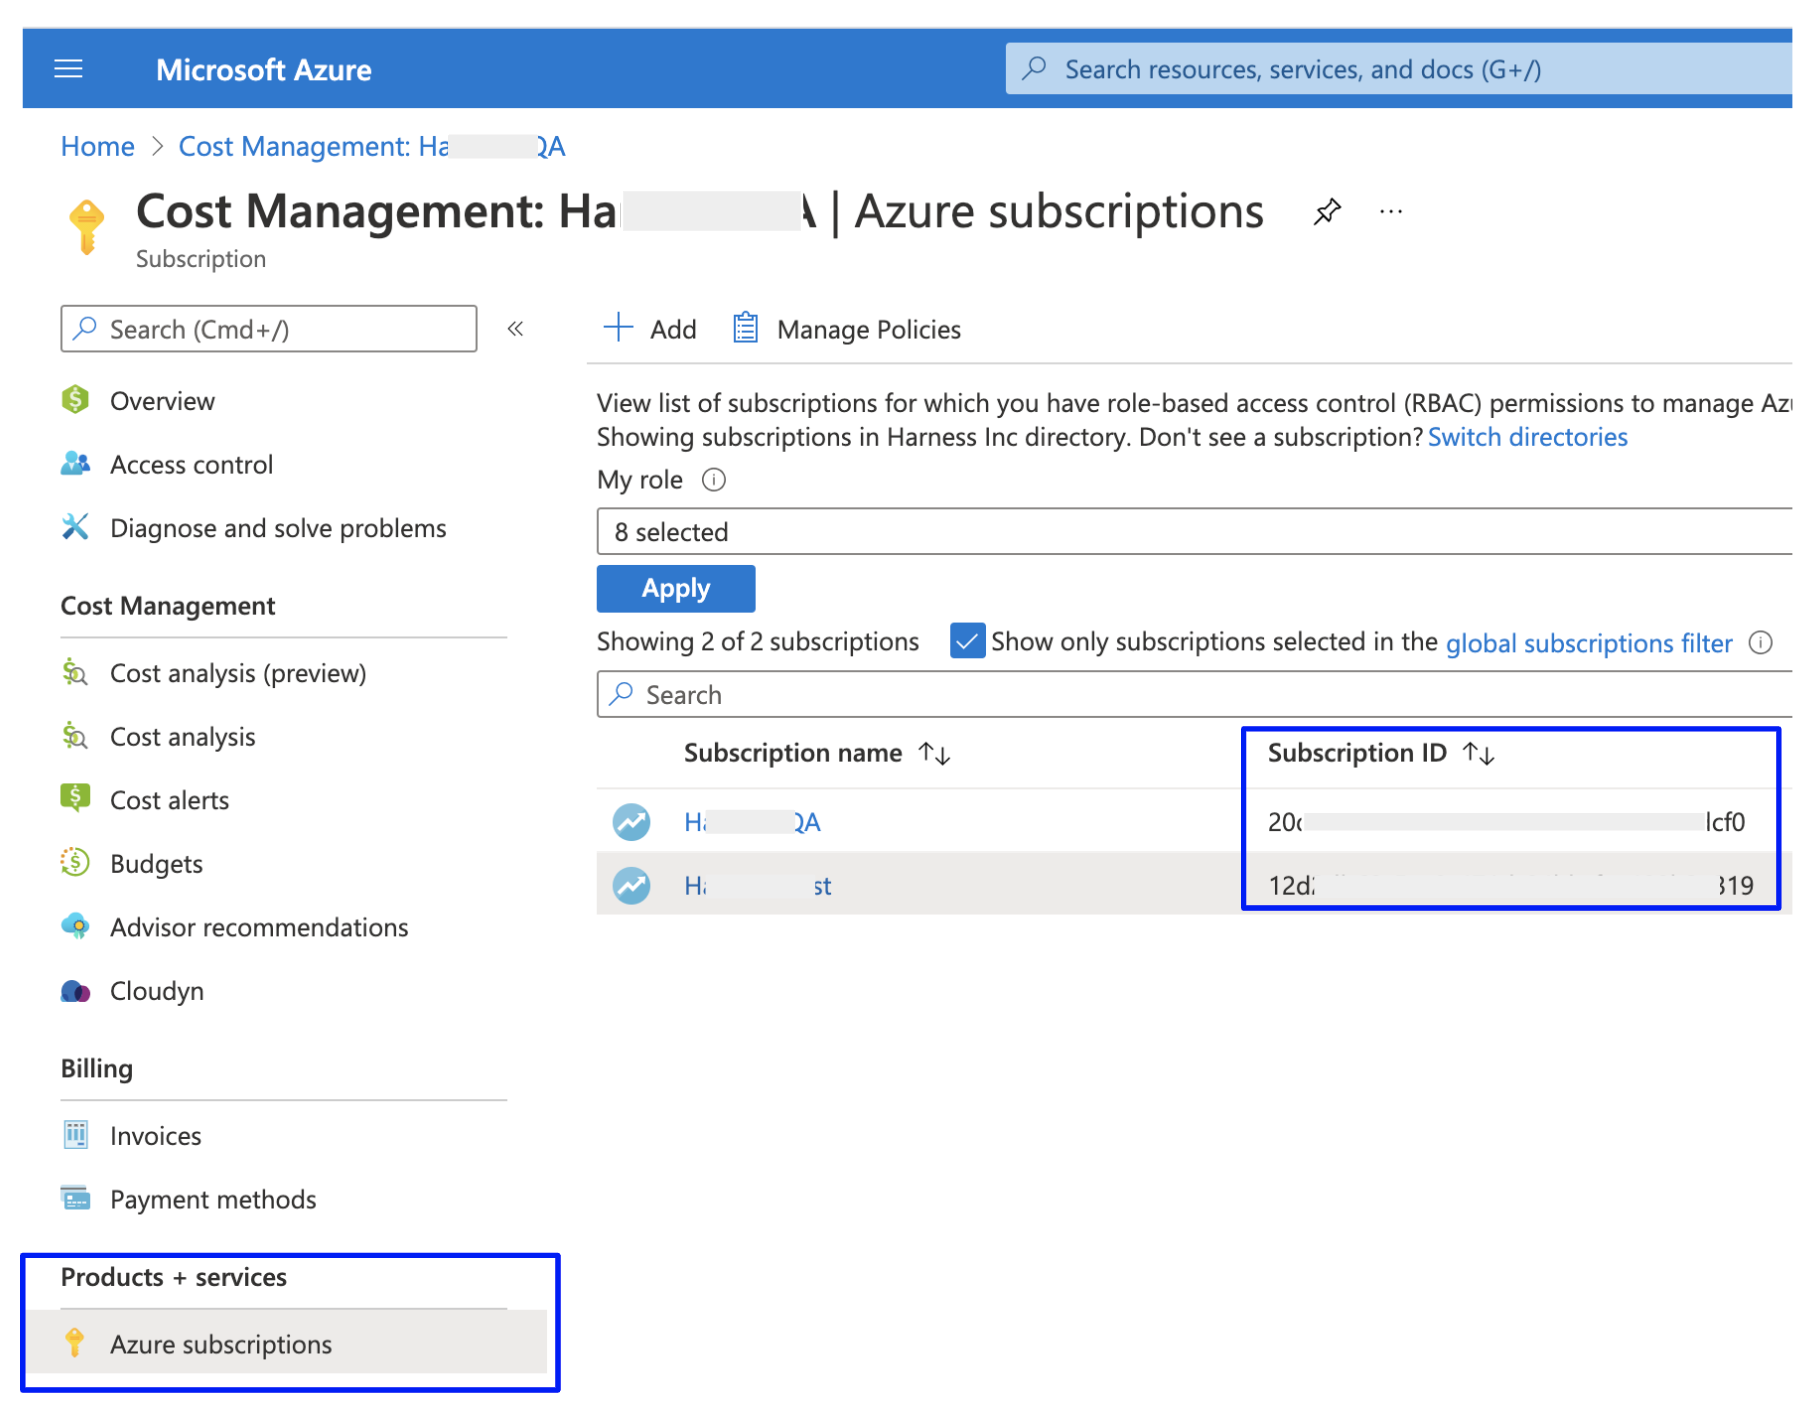 The Cost Management page on Azure